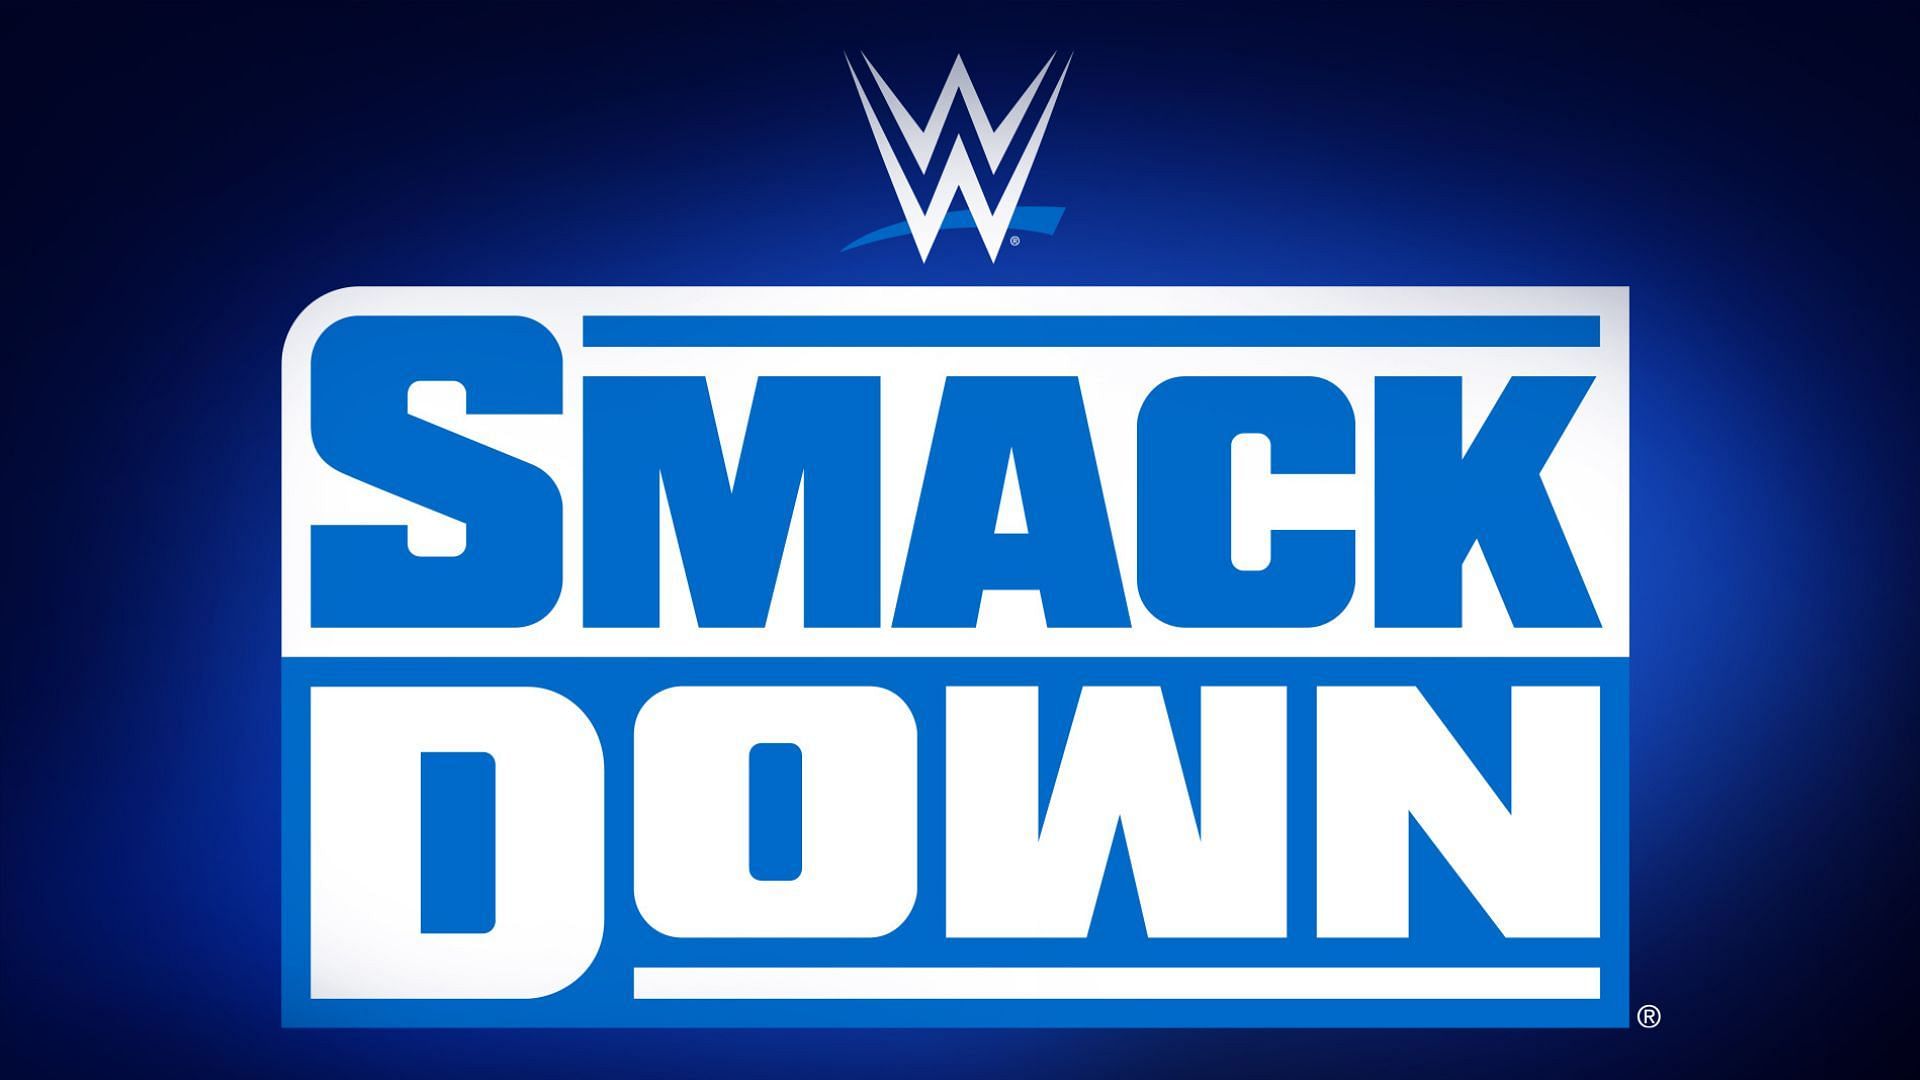 WWE SmackDown is the second longest-running weekly program in the company!